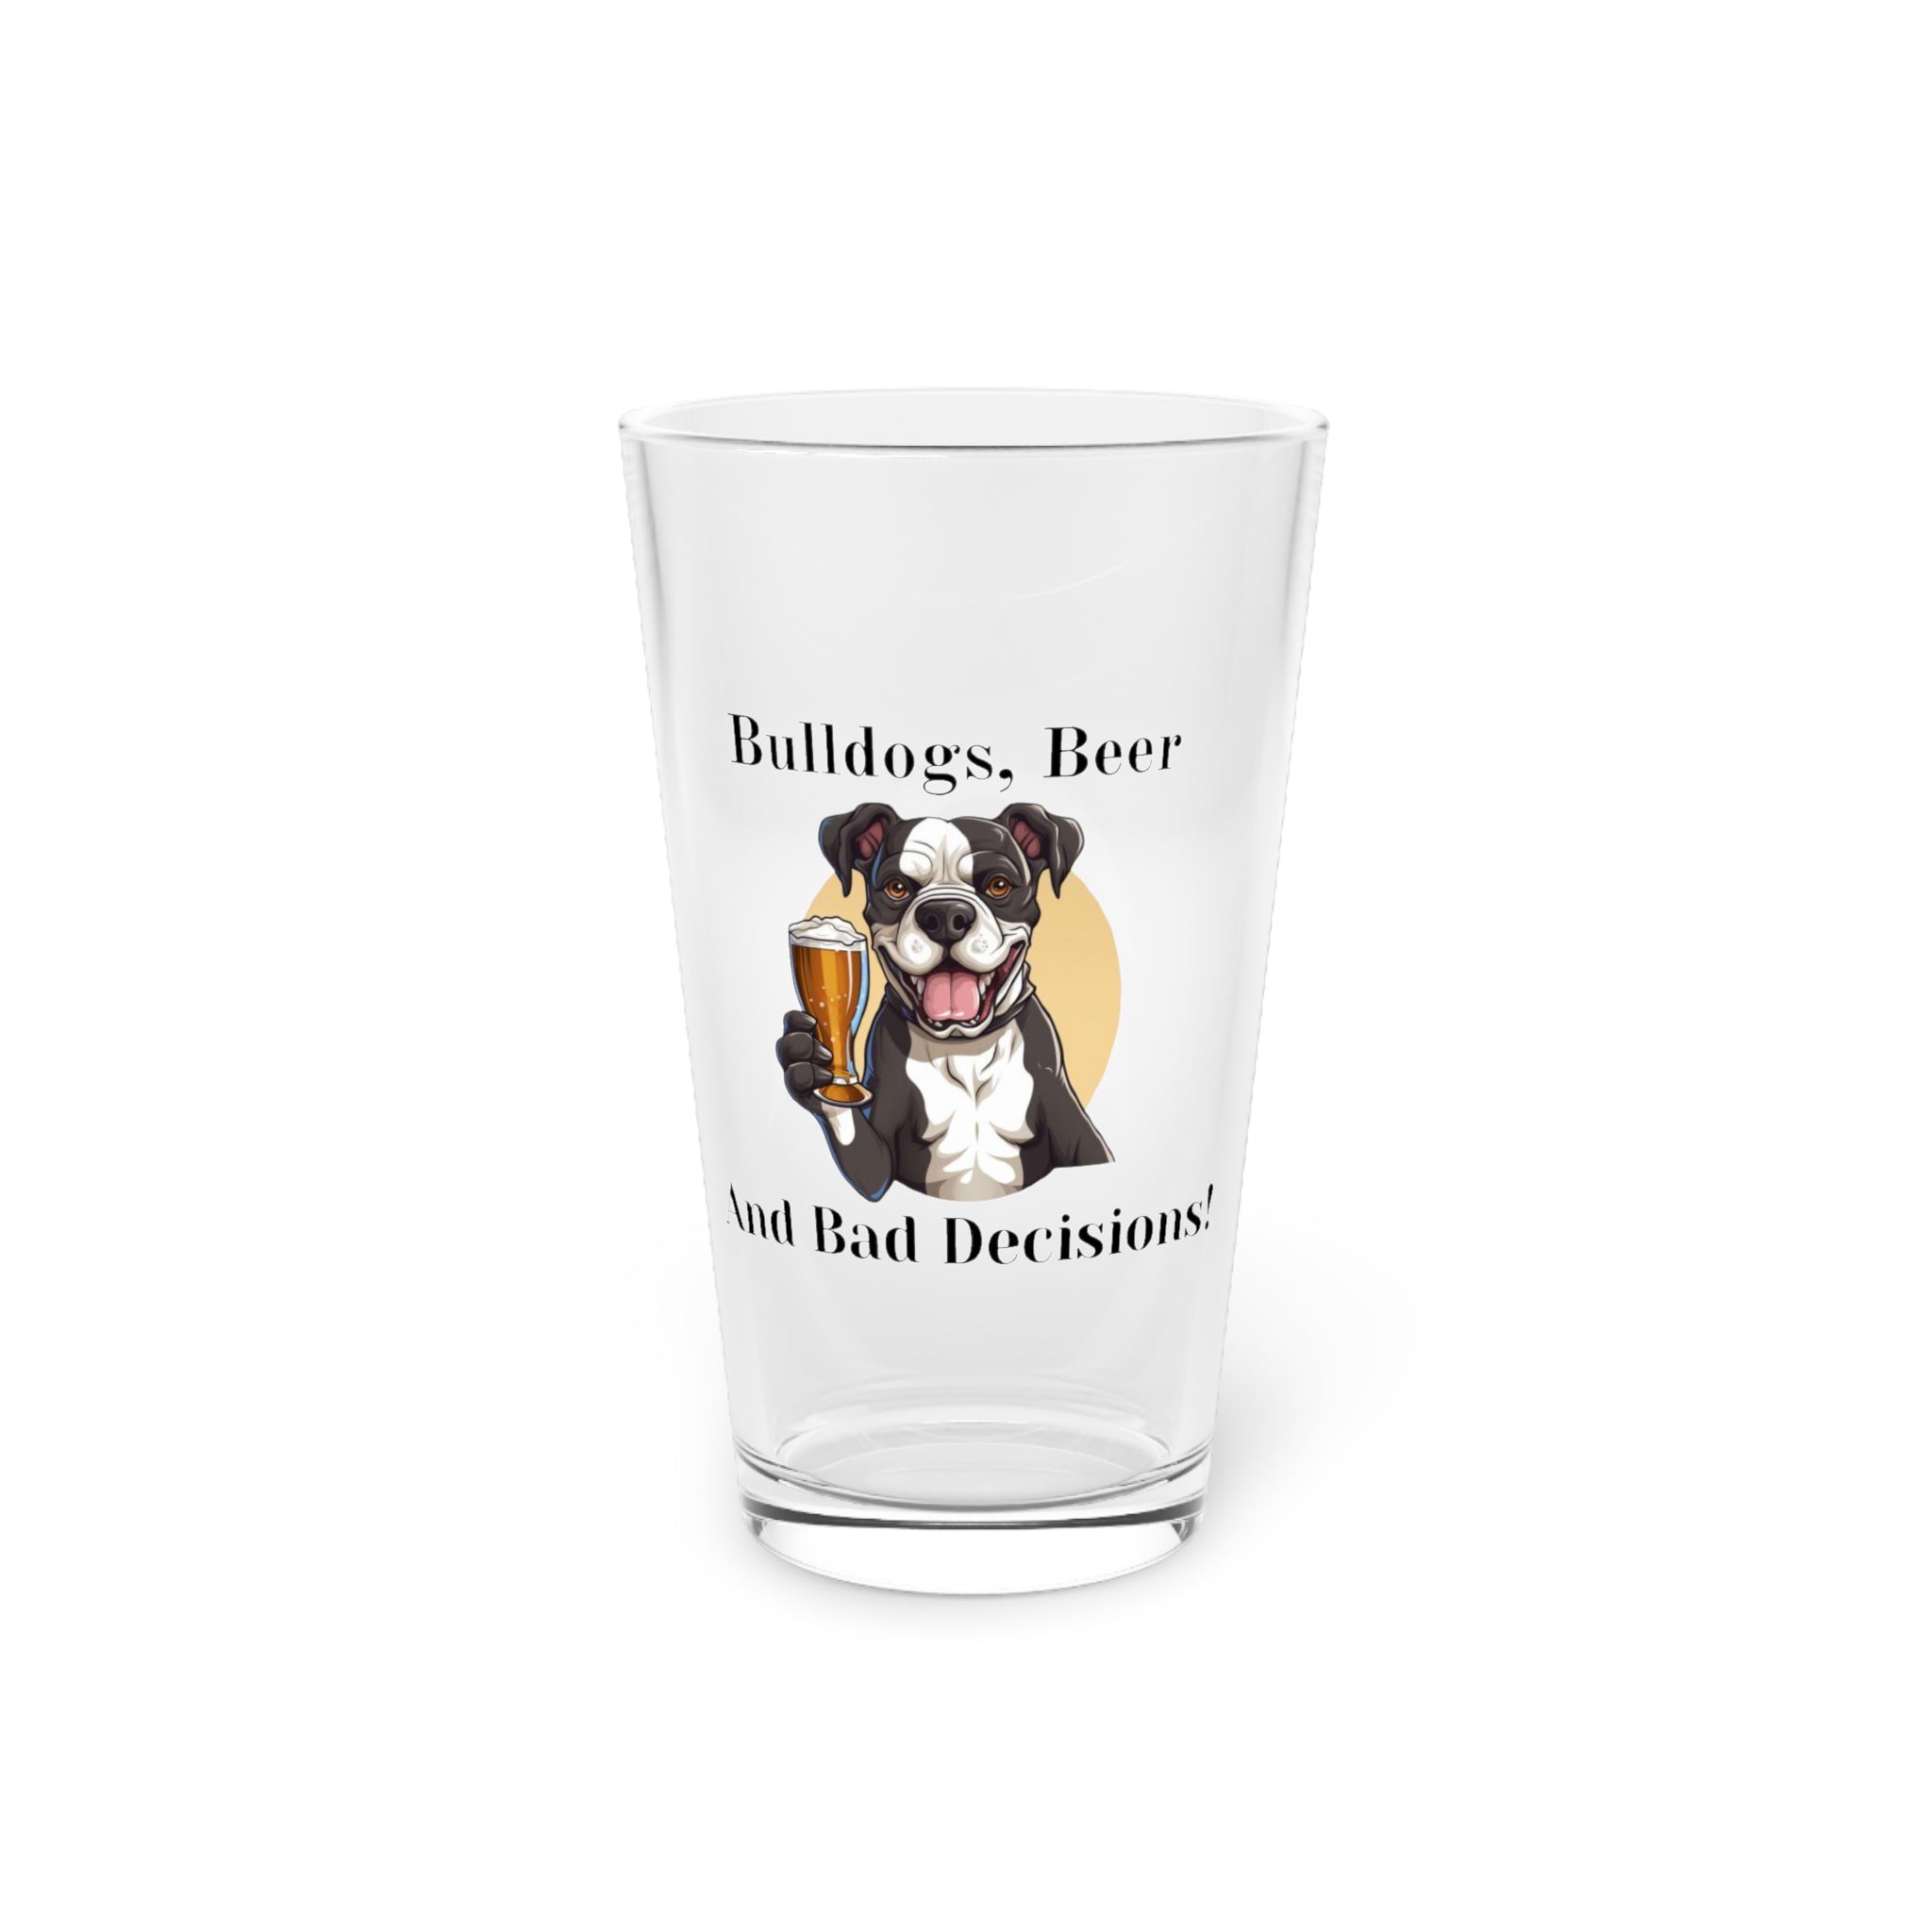 Bulldogs, Beer, and Bad Decisions!" - The Ultimate Pint Glass by Tipsy Bully (American/Black)